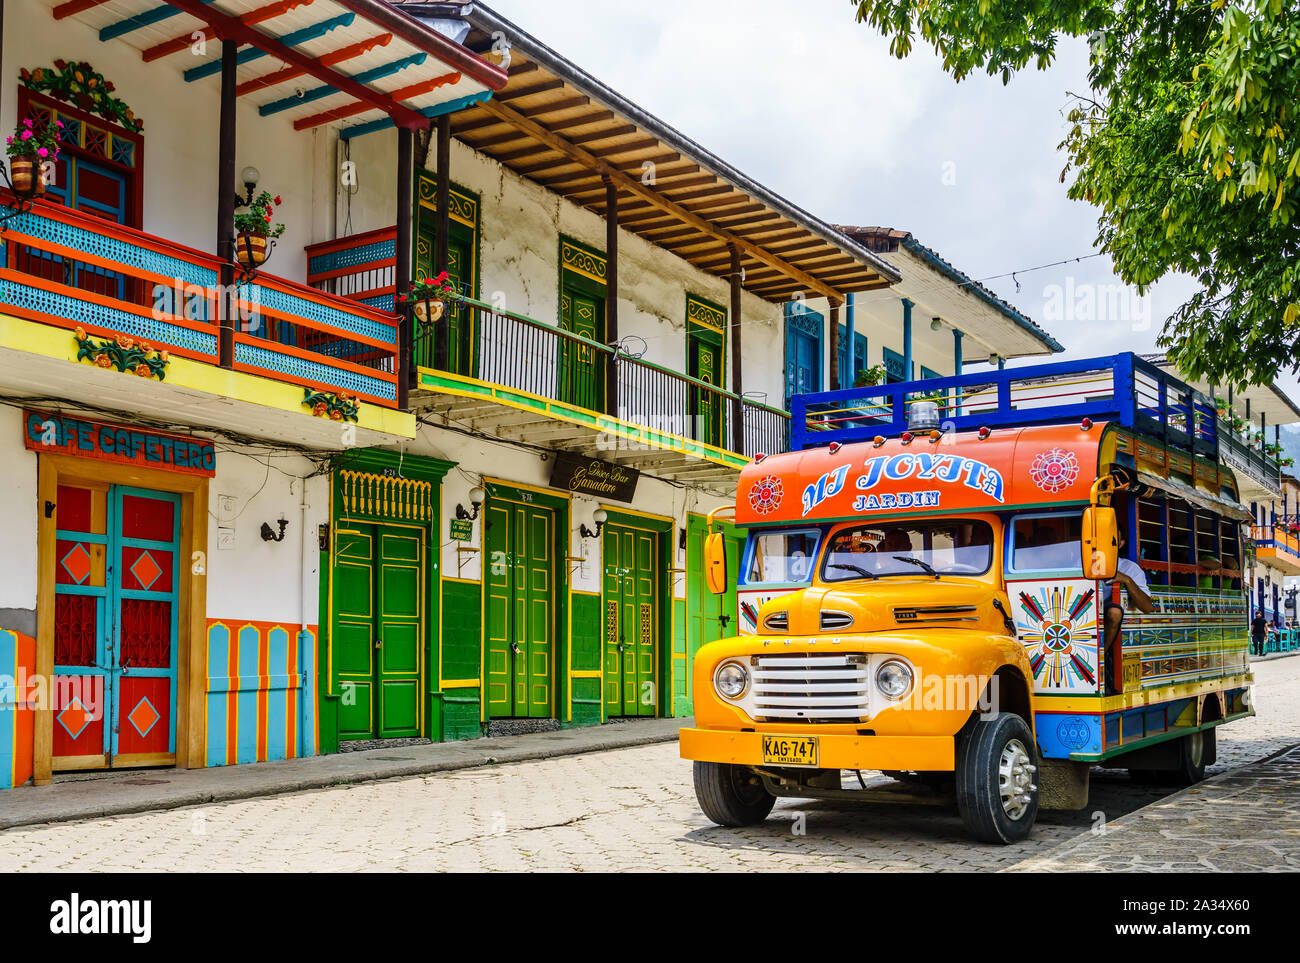 View on typical colorful chicken bus in Jardin, Antioquia, Colombia, South America on 27th March 2019  Stock Photo